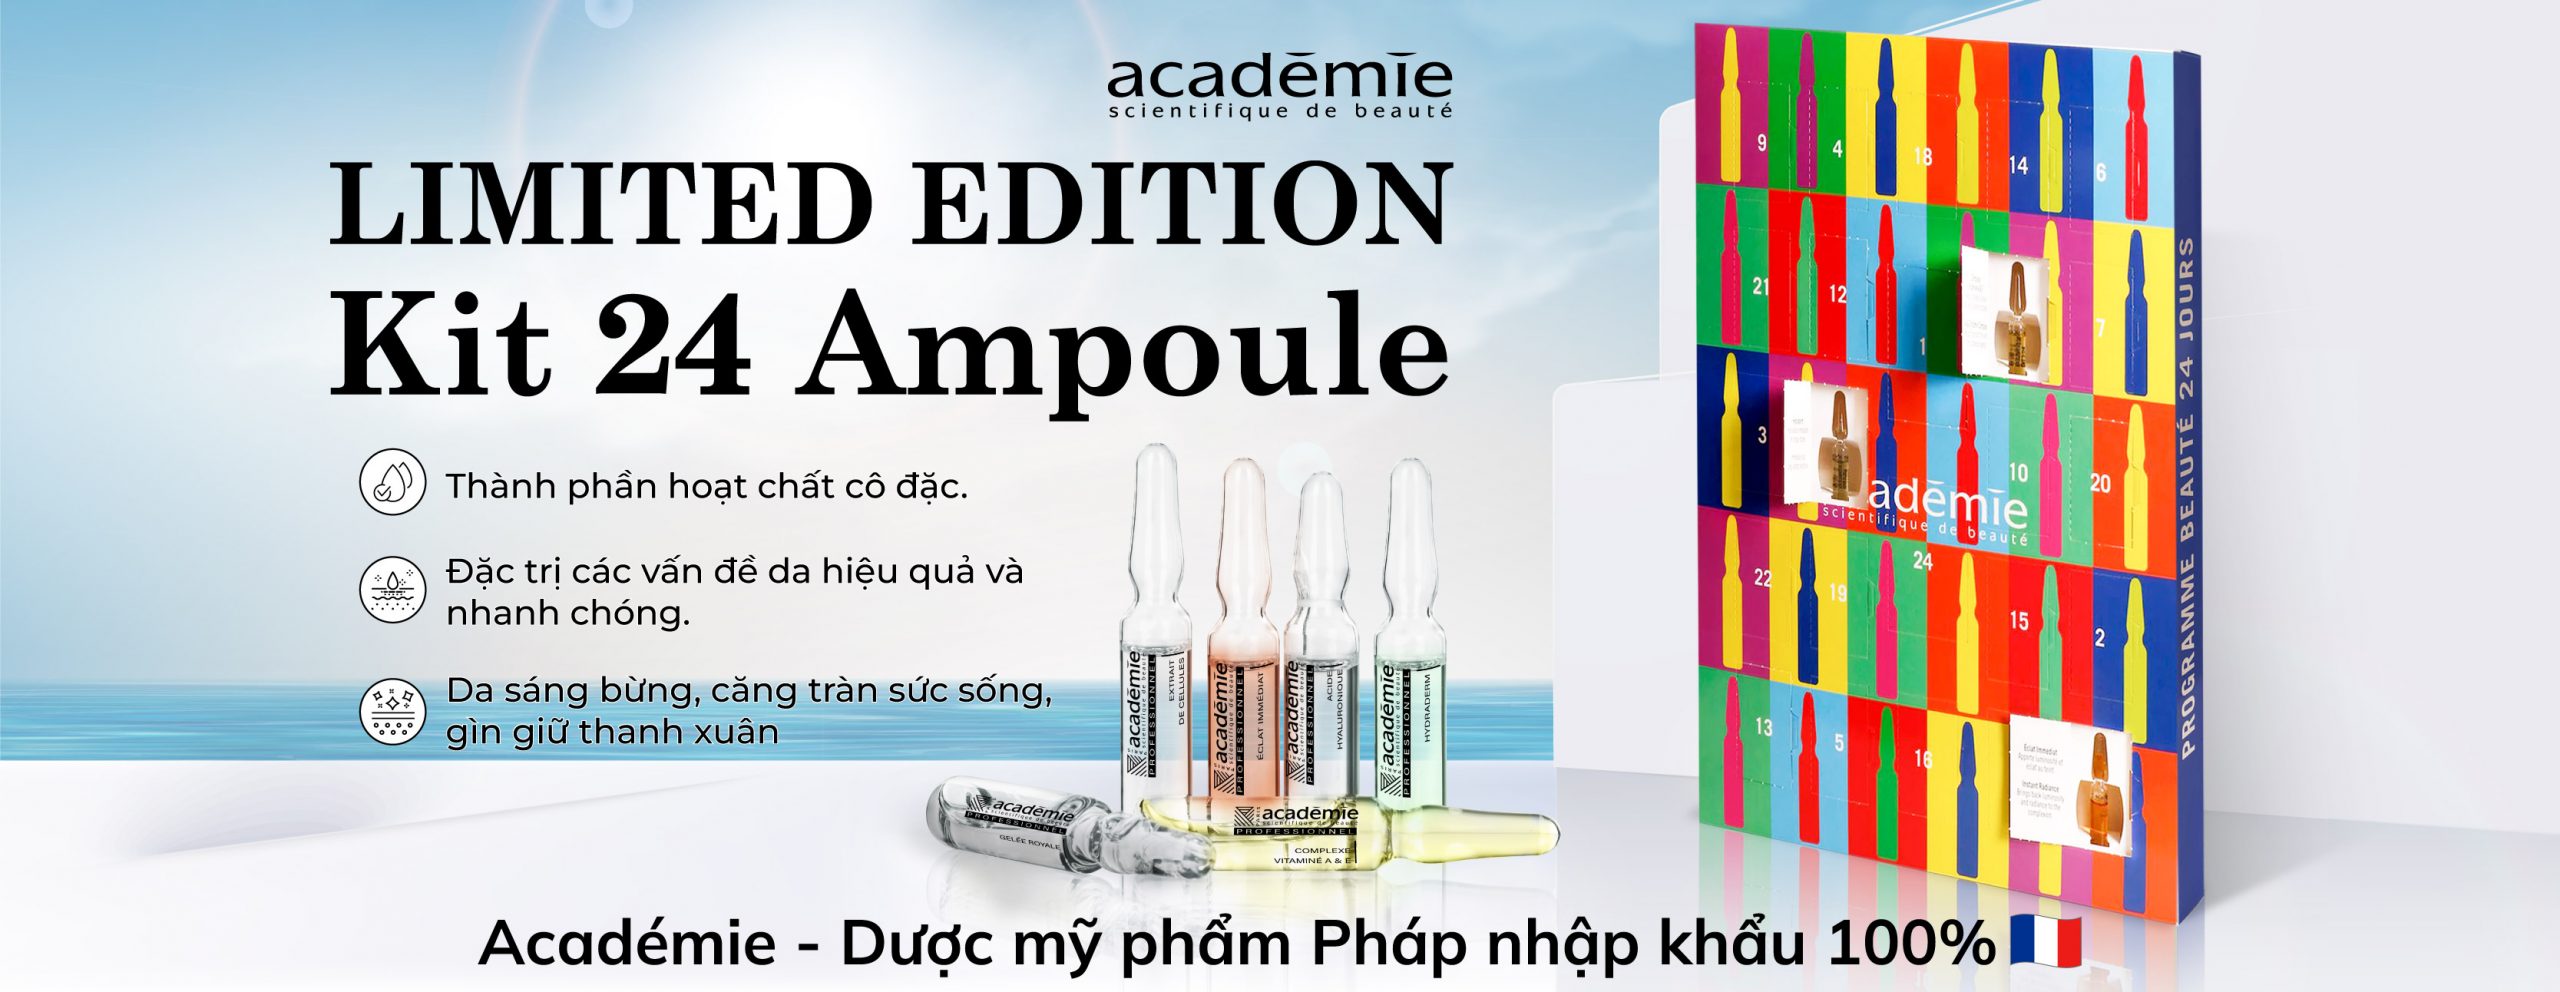 1003 New Ampoule kit 7204 Banner Web AB 3 scaled